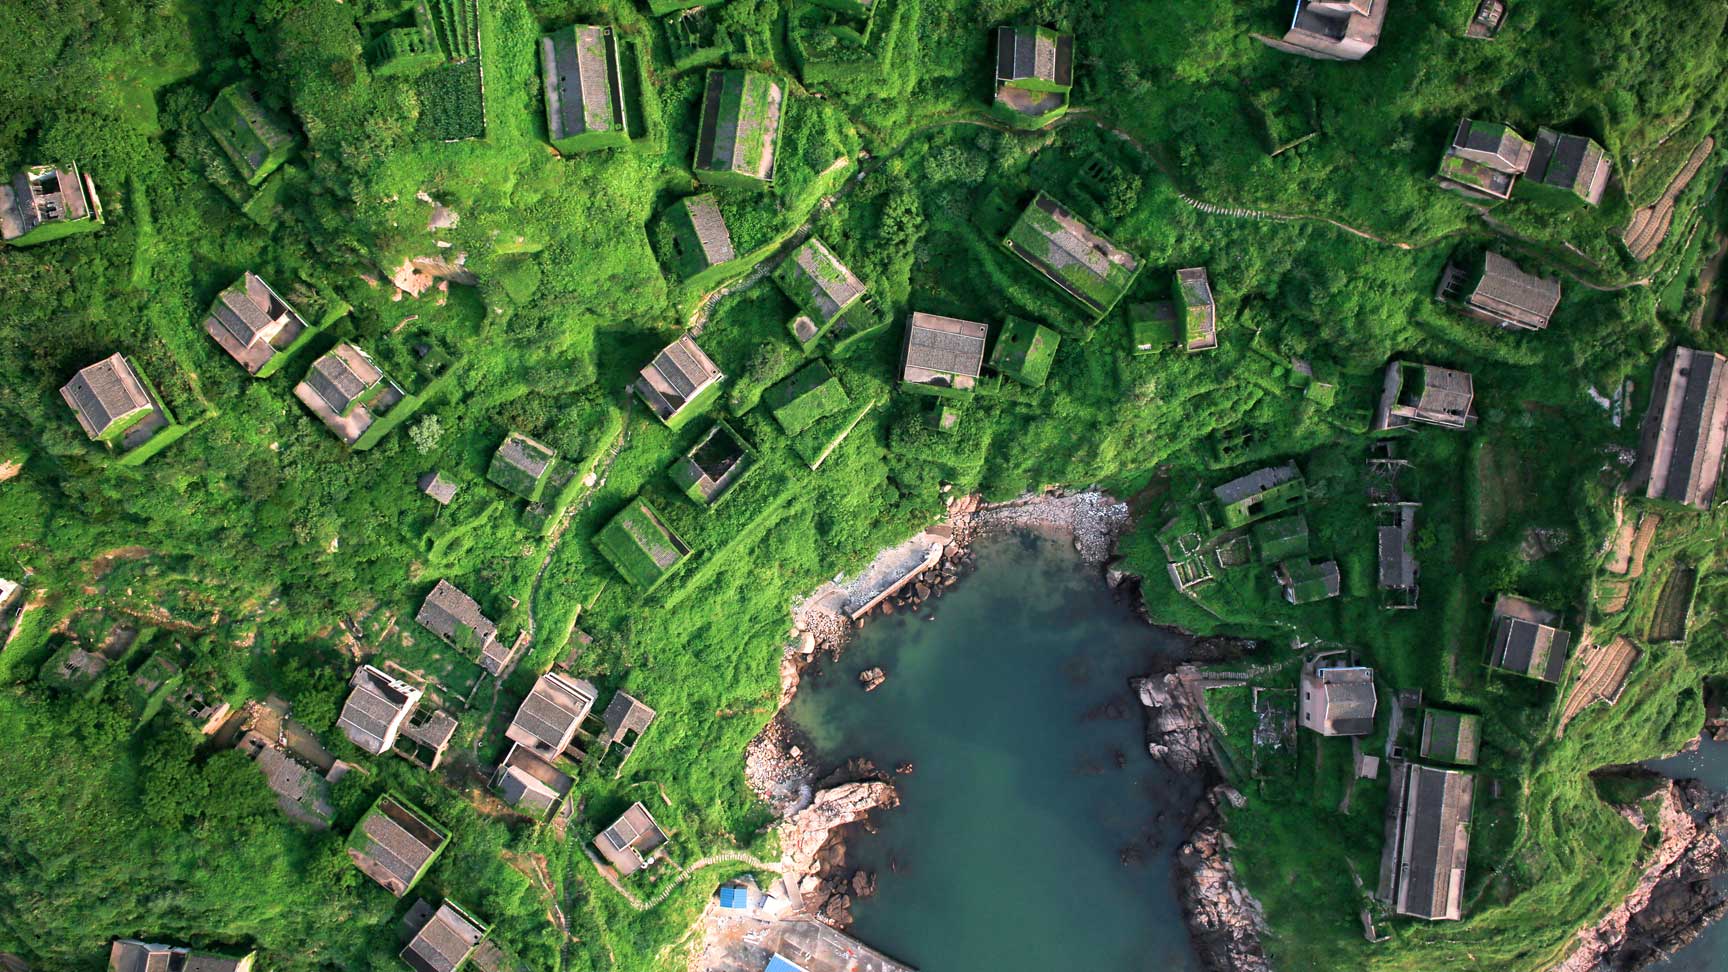 An aerial view of lush green vegetation covering an abandoned village, Houtouwan, China